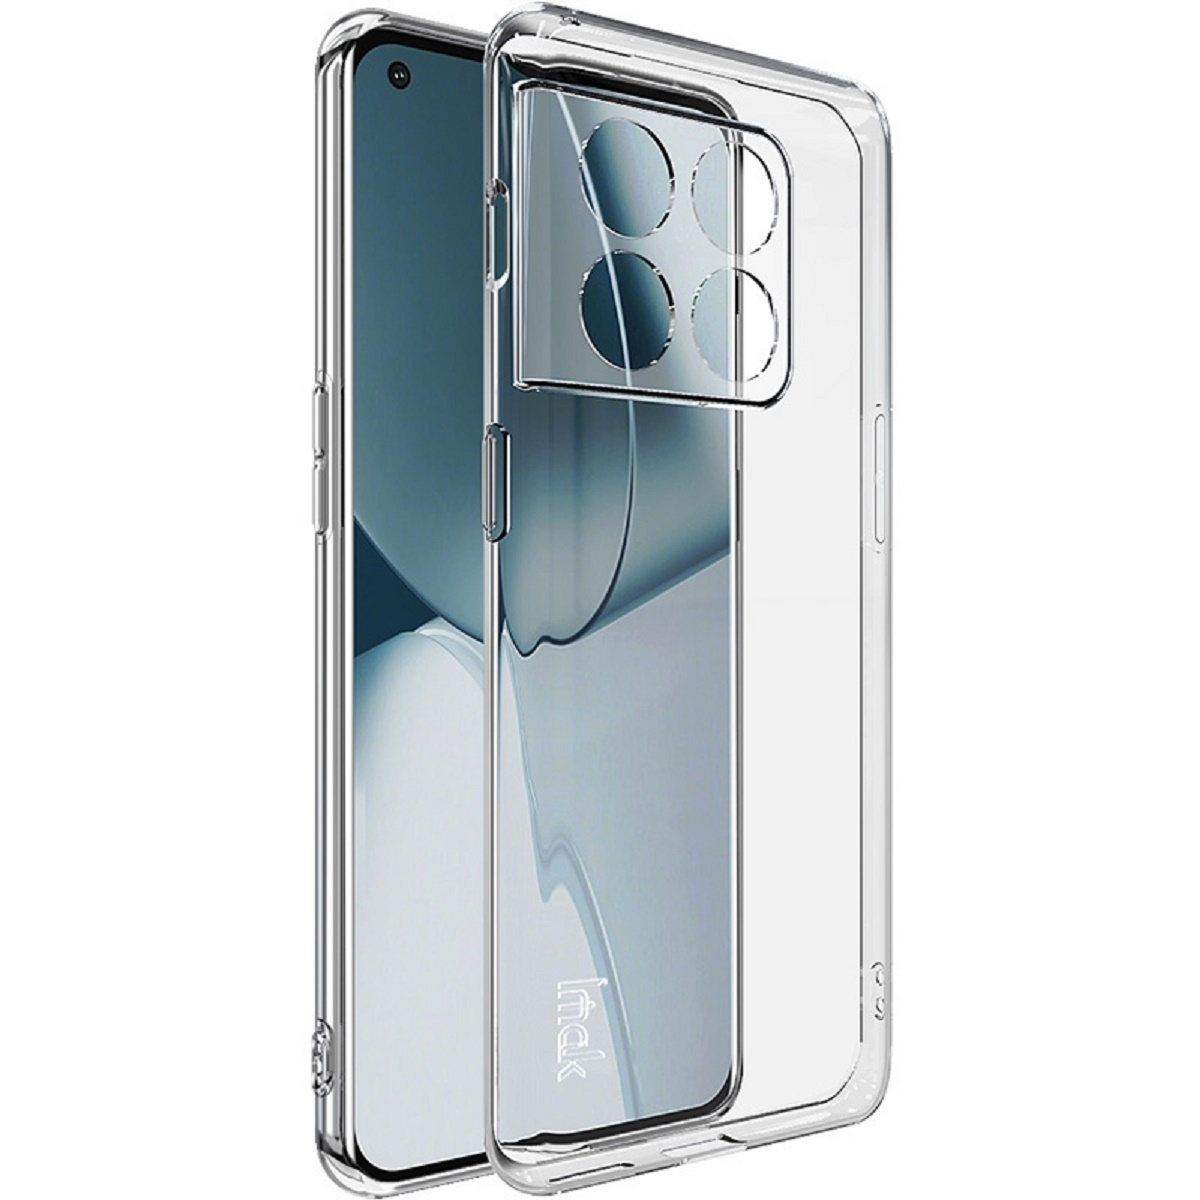 Backcover, 10 OnePlus, PROTECTORKING Backcover, Transparent Hülle, Pro,